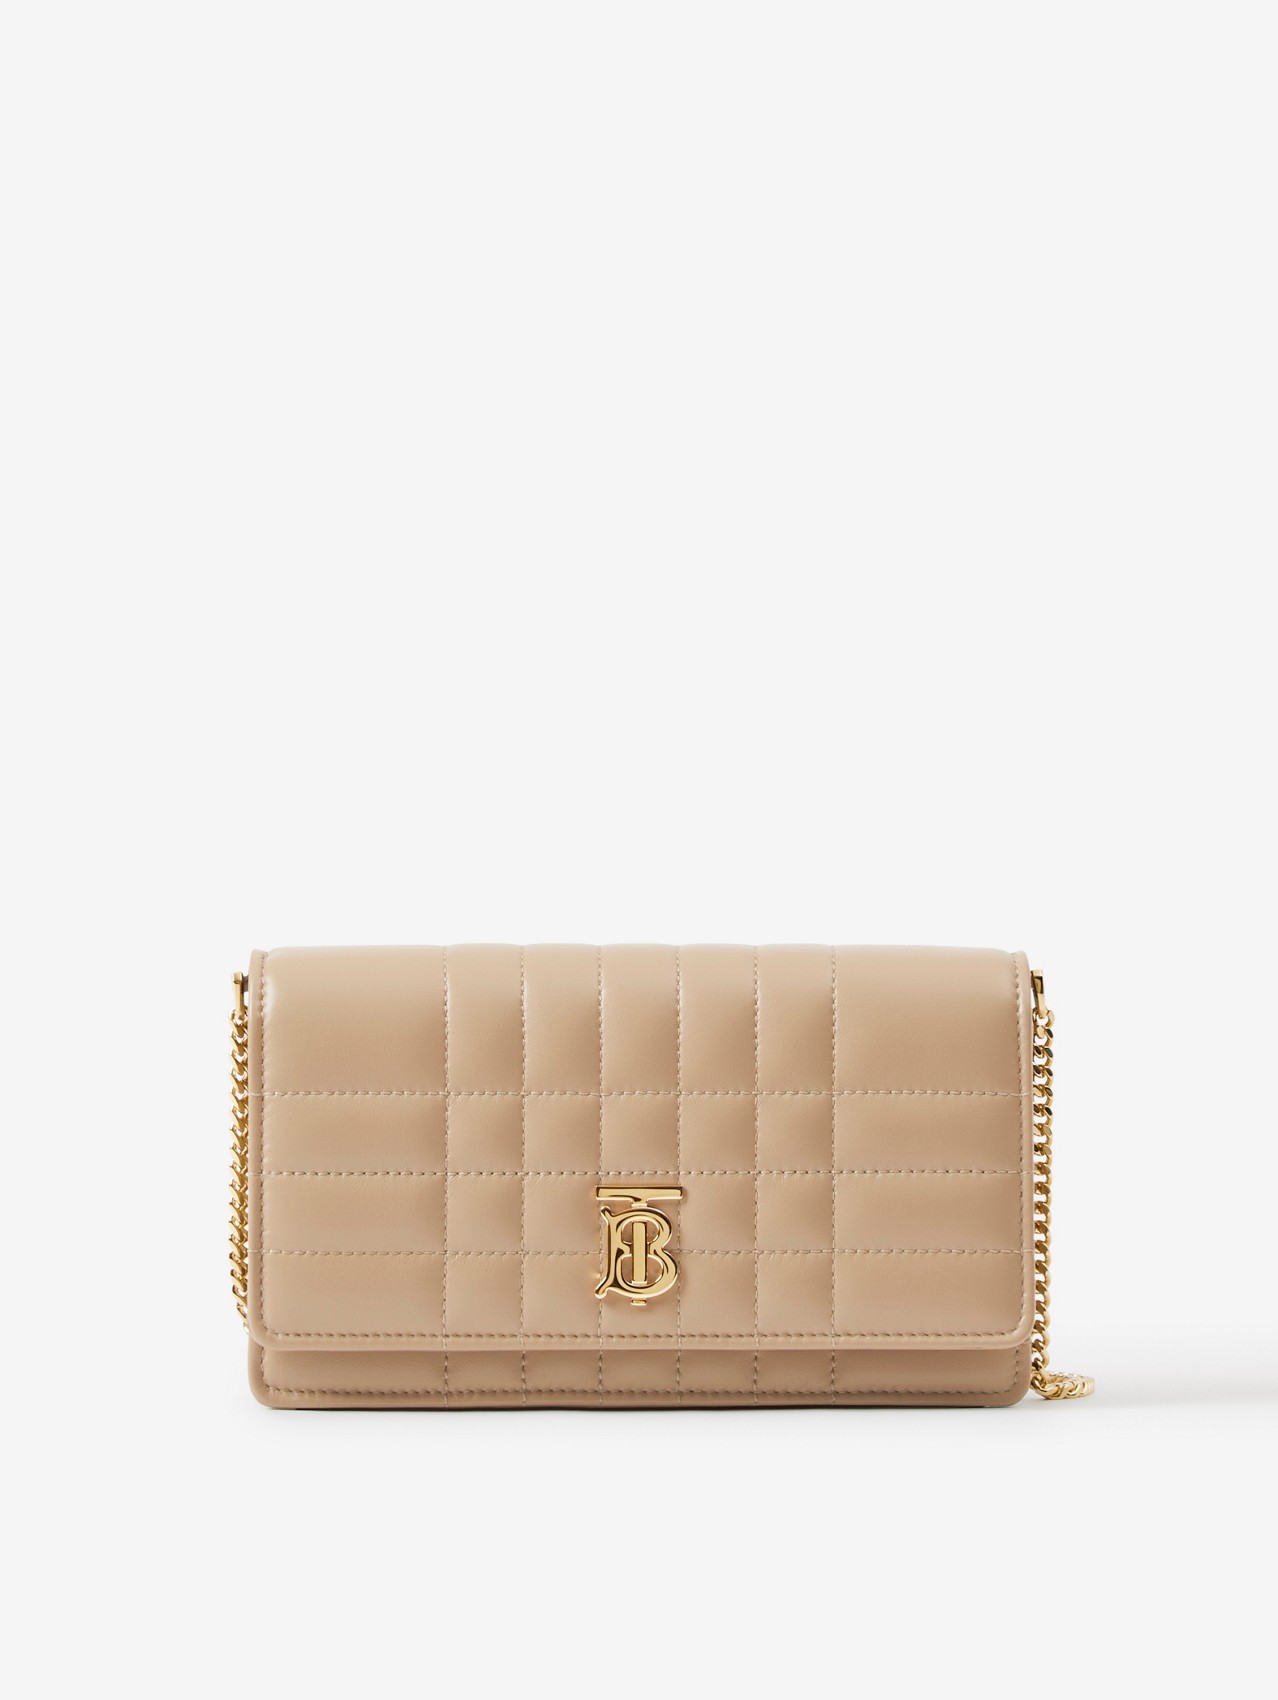 Women's Bags | Check & Leather Bags for Women | Burberry® Official